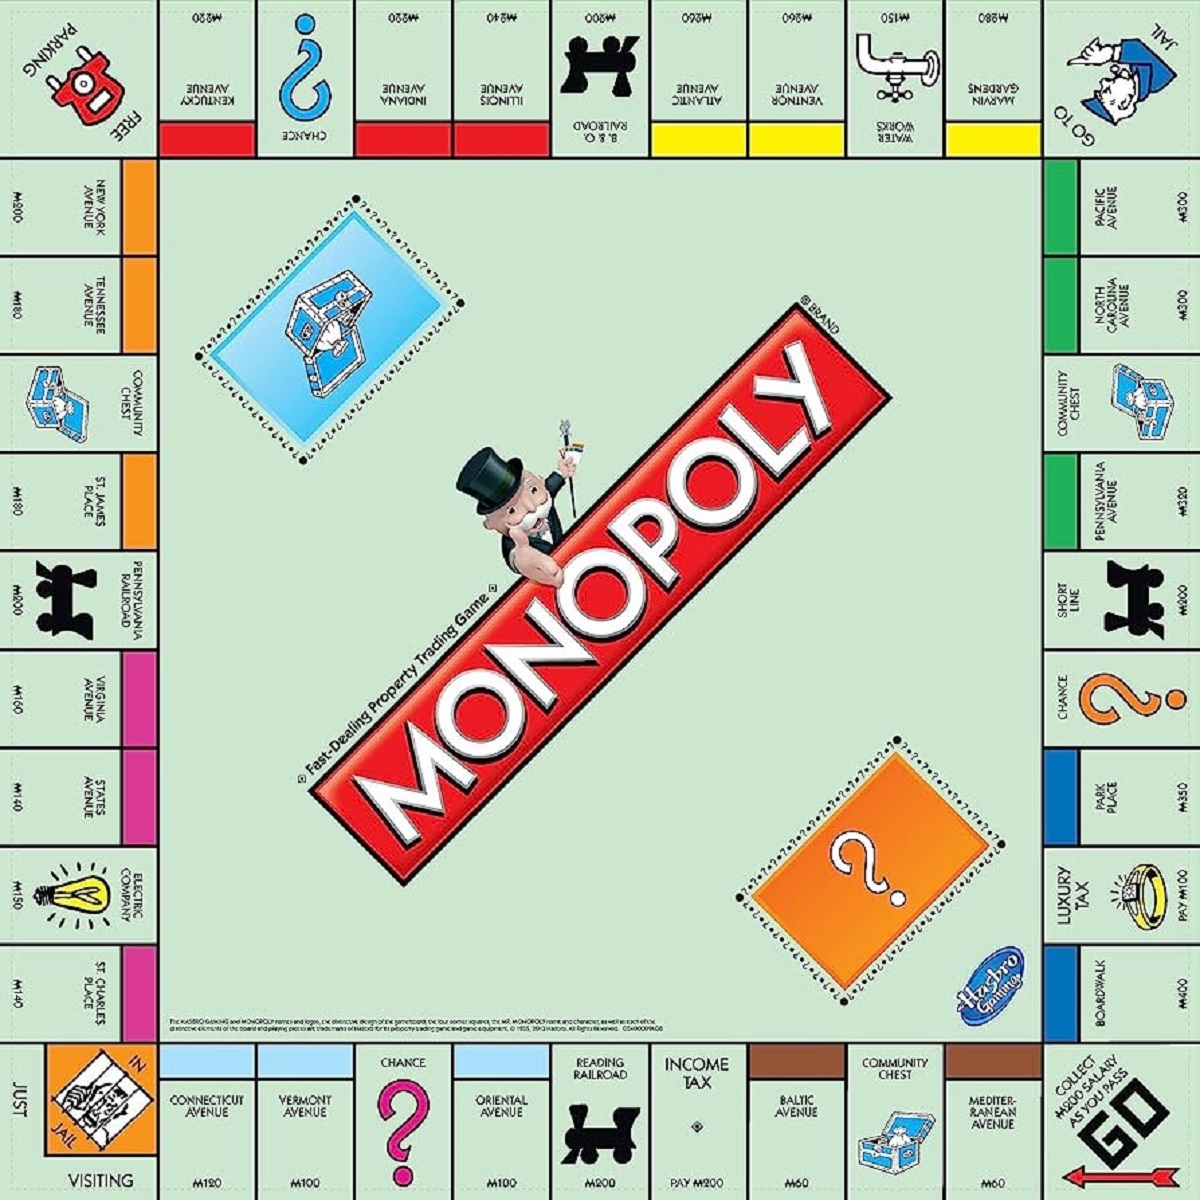 I was playing Monopoly, and someone owned a load of properties all clustered together. I said “you’ve got a bit of a monopoly on that part of the board. Hey that’s funny, because we’re playing Monopoly, and you got a... oh I see now.”